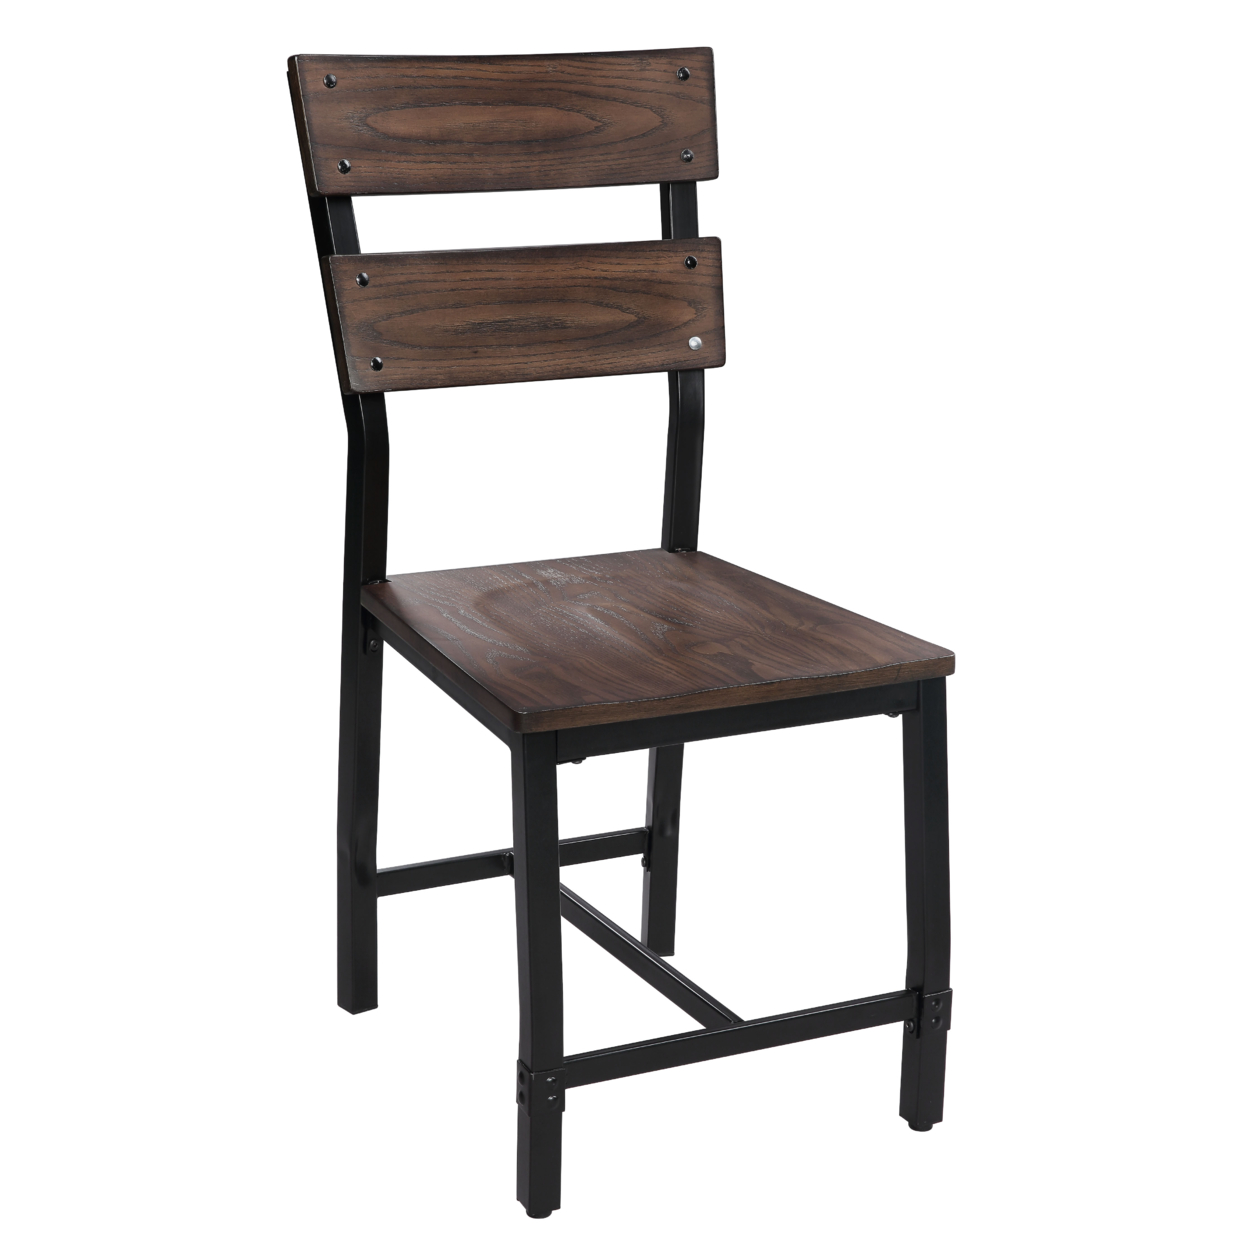 Wood And Metal Dining Side Chairs, Set Of 2, Brown And Black- Saltoro Sherpi